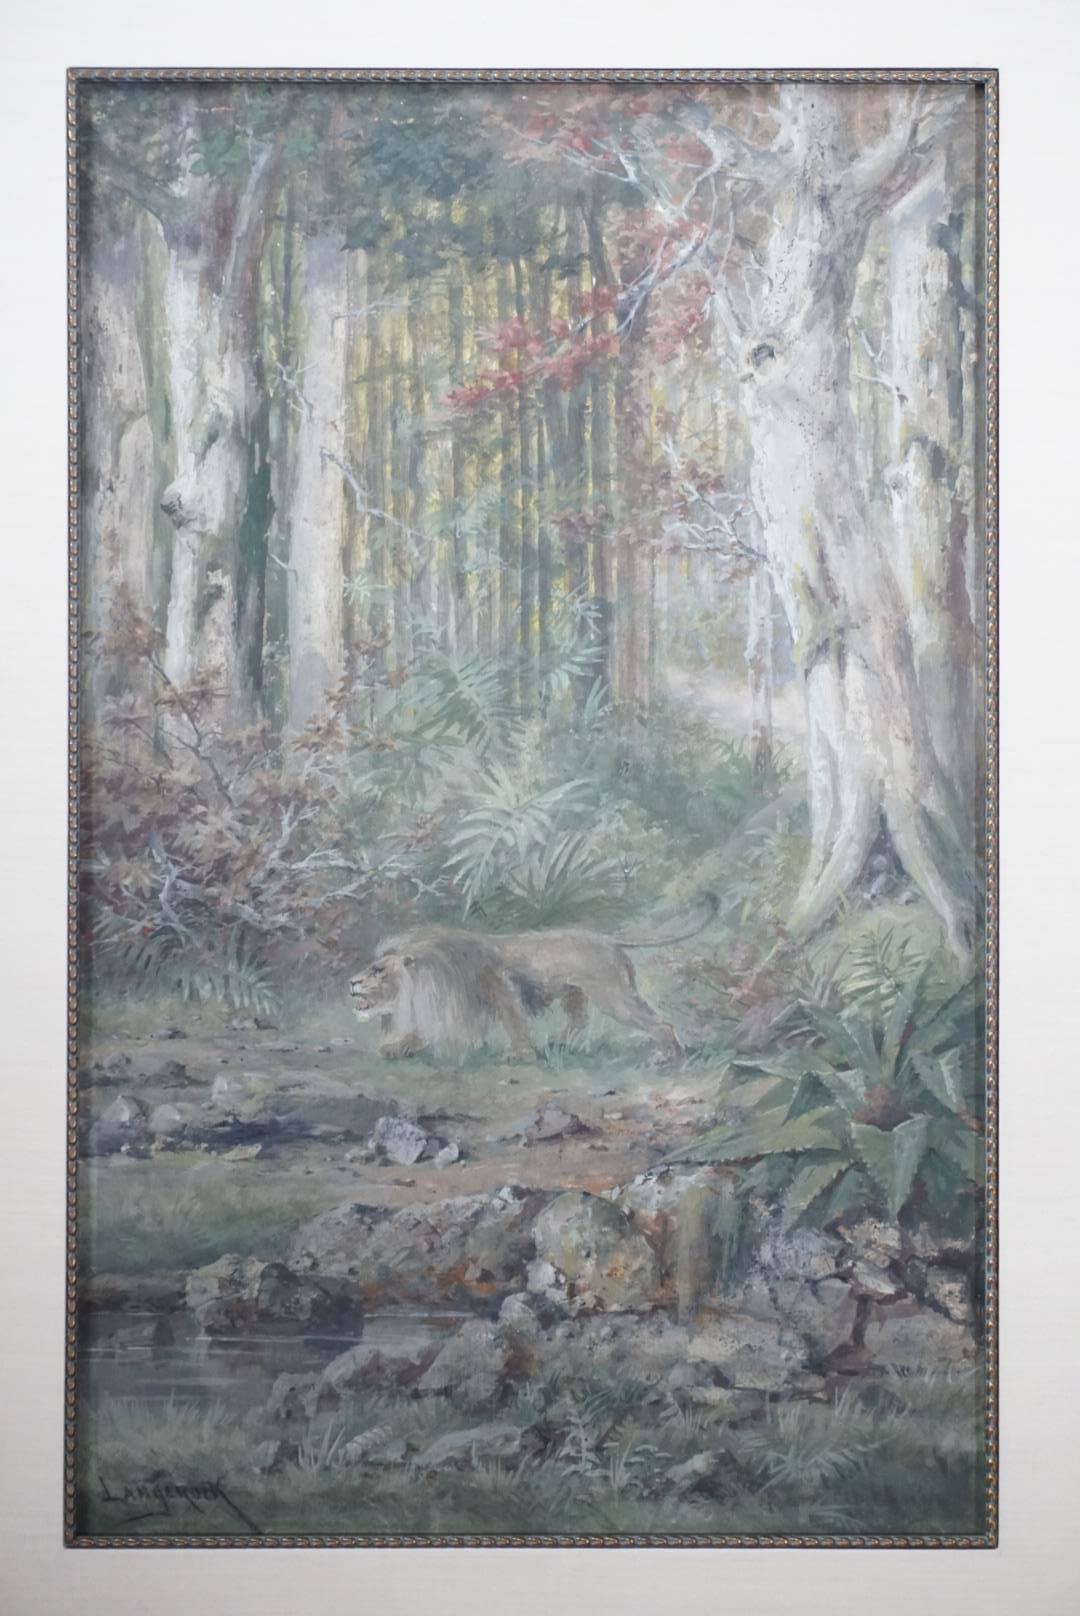 Henri Langerock (1830-1915) Belgium Watercolor of a Prowling Lion in the Jungle. Watercolor on paper on board under archival glass with new frame.

Measures: Sight: 18.5